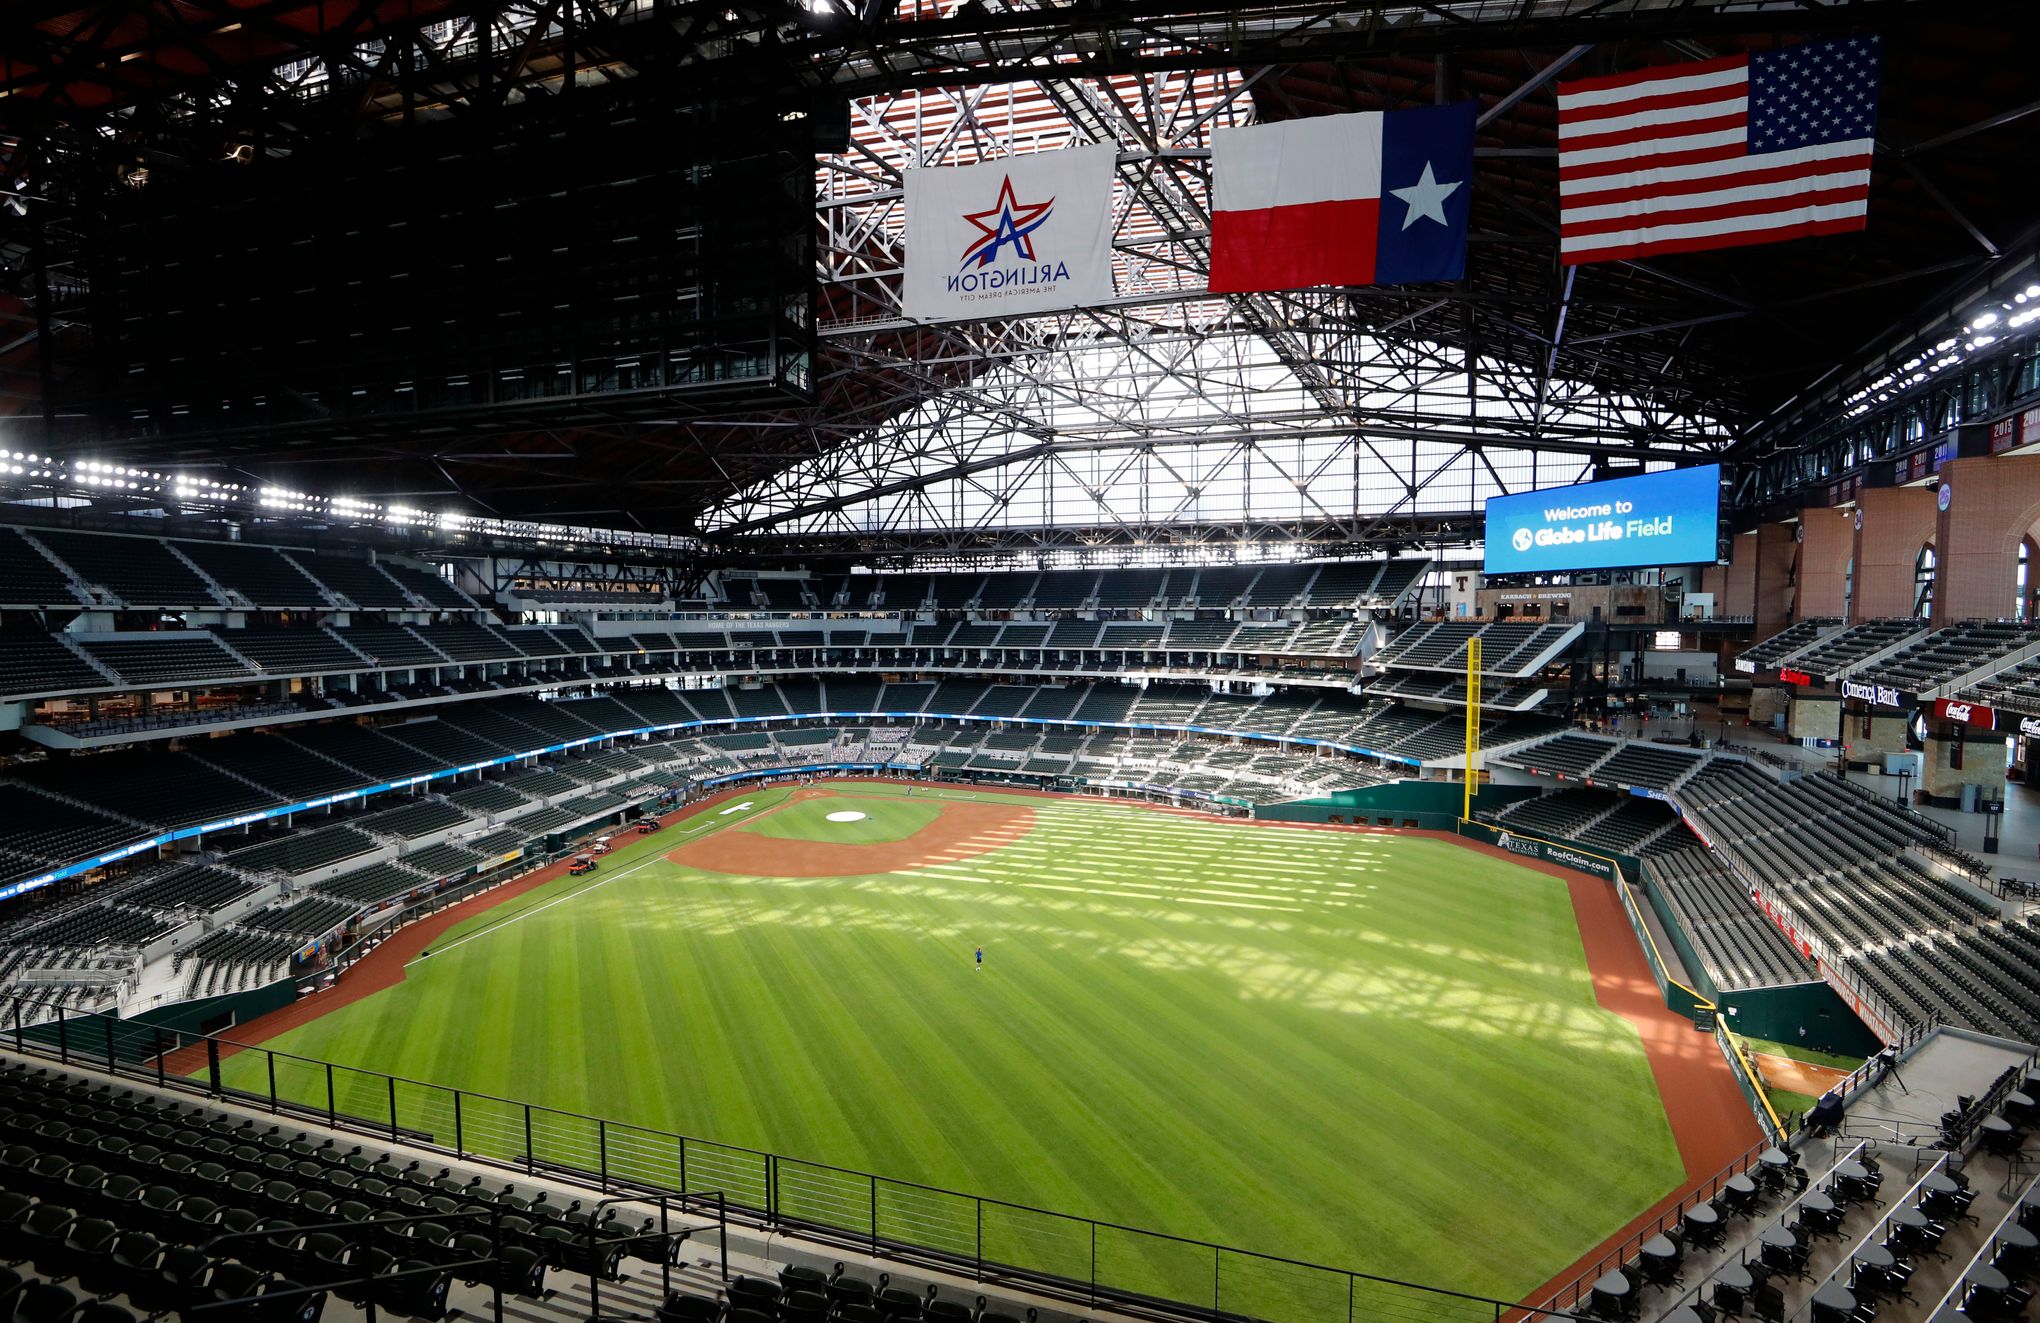 PHOTOS: Here's What Globe Life Looked Like For Texas Rangers' Home